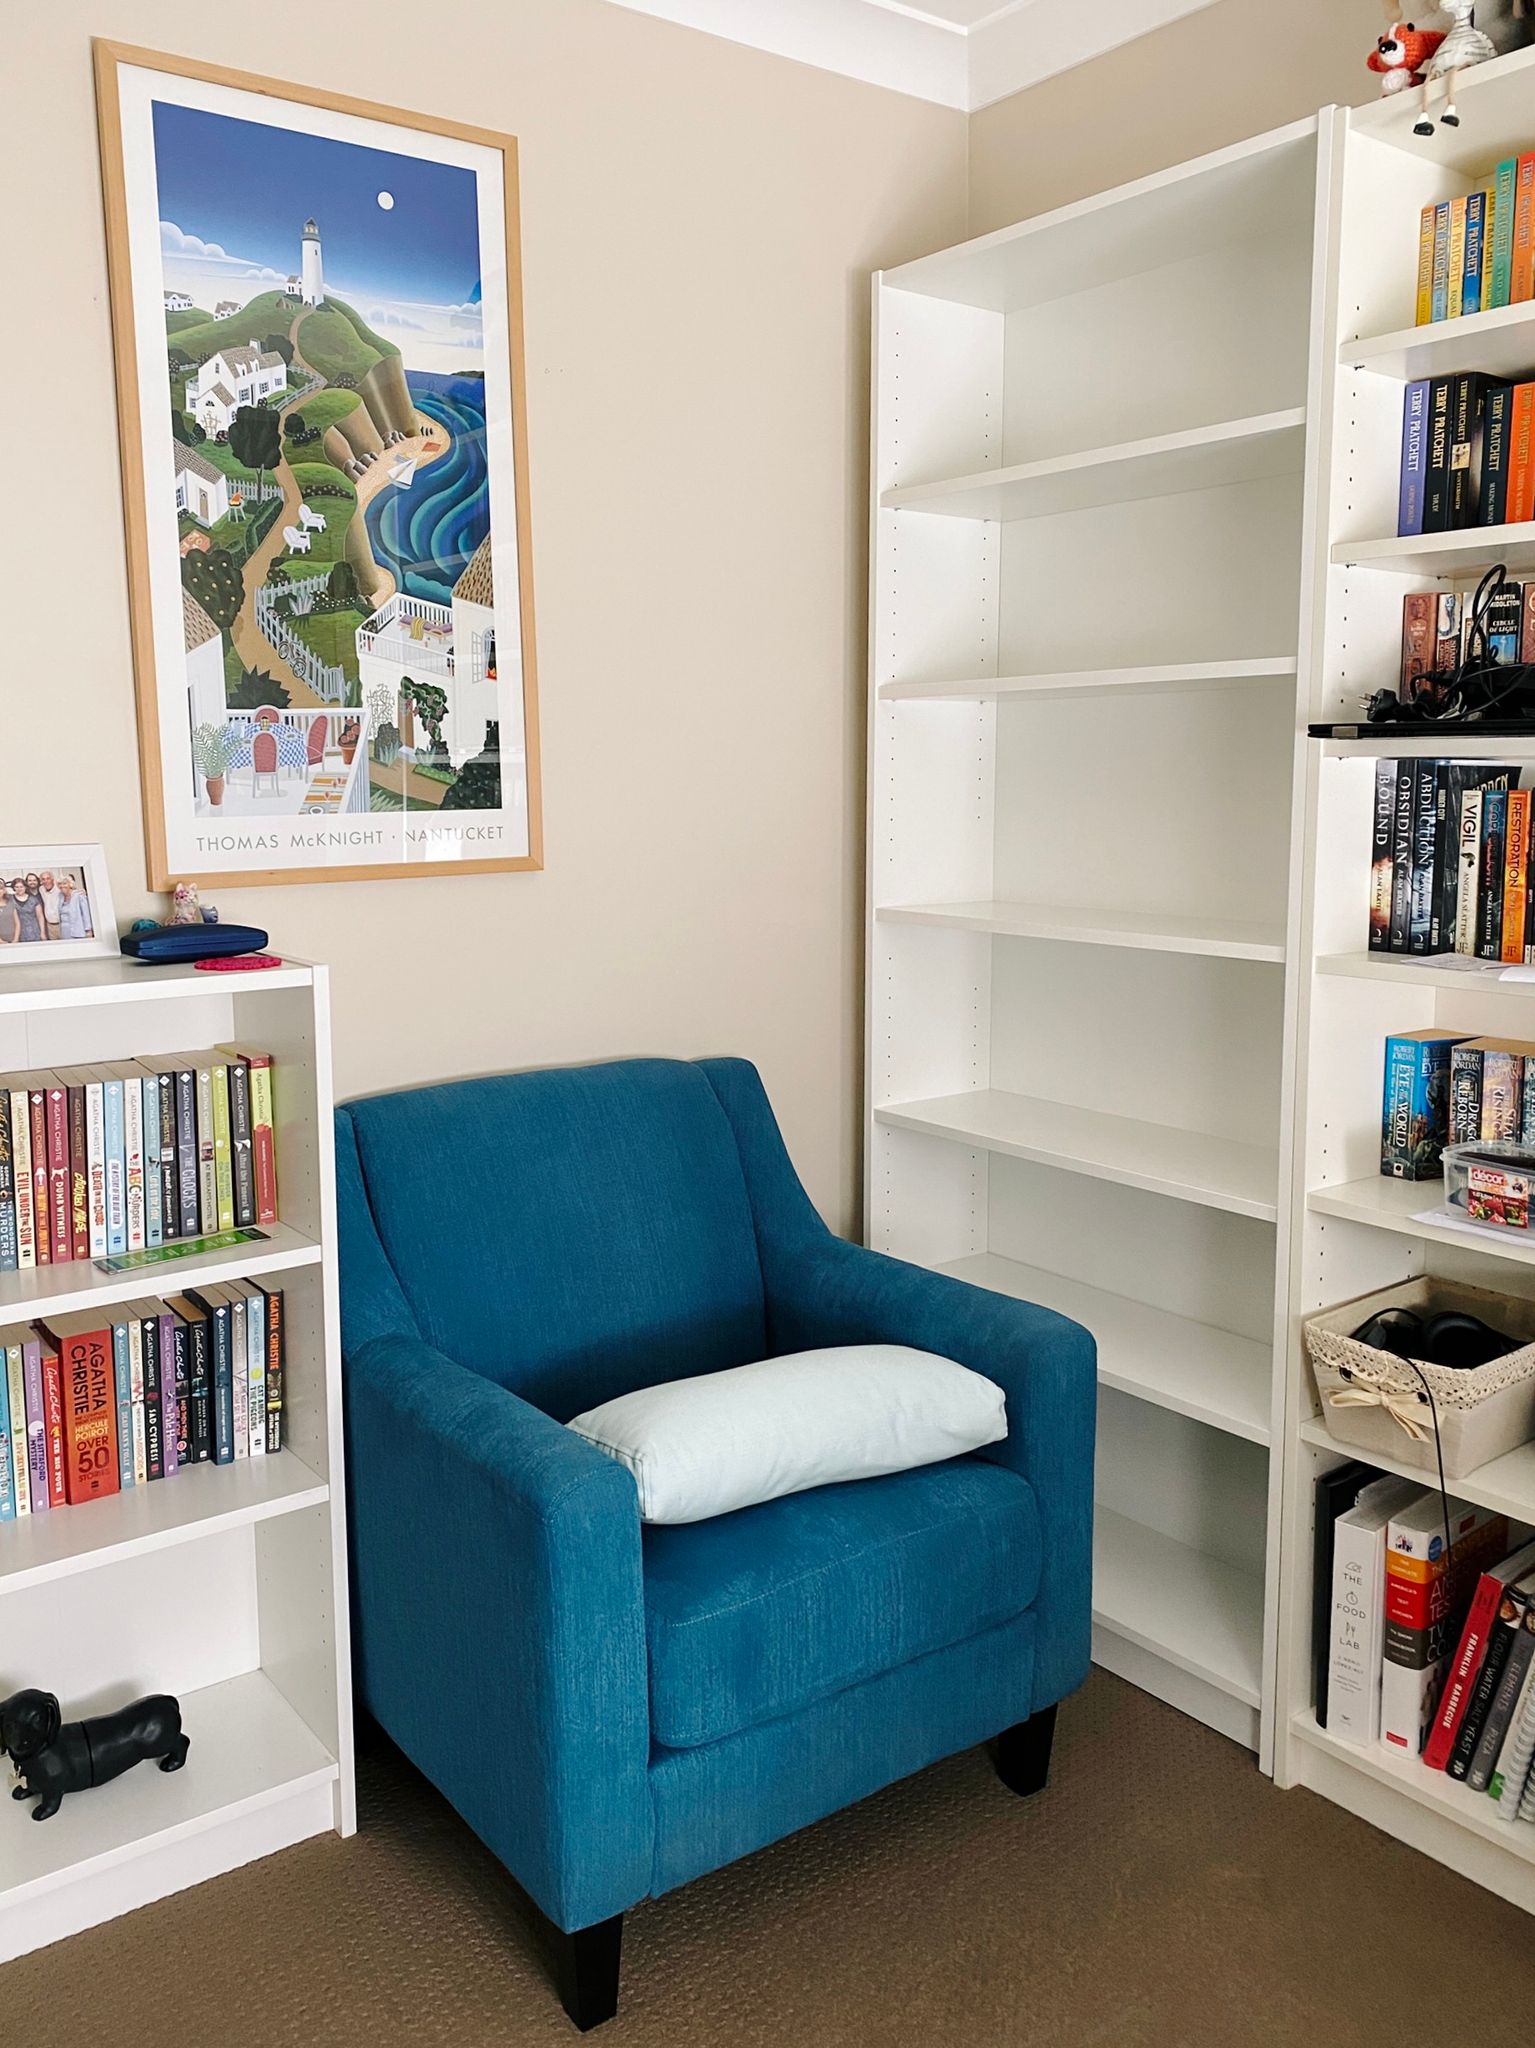 A photo of an empty white IKEA Billy bookshelf sitting next to a full-size one, with a blue armchair next to it.